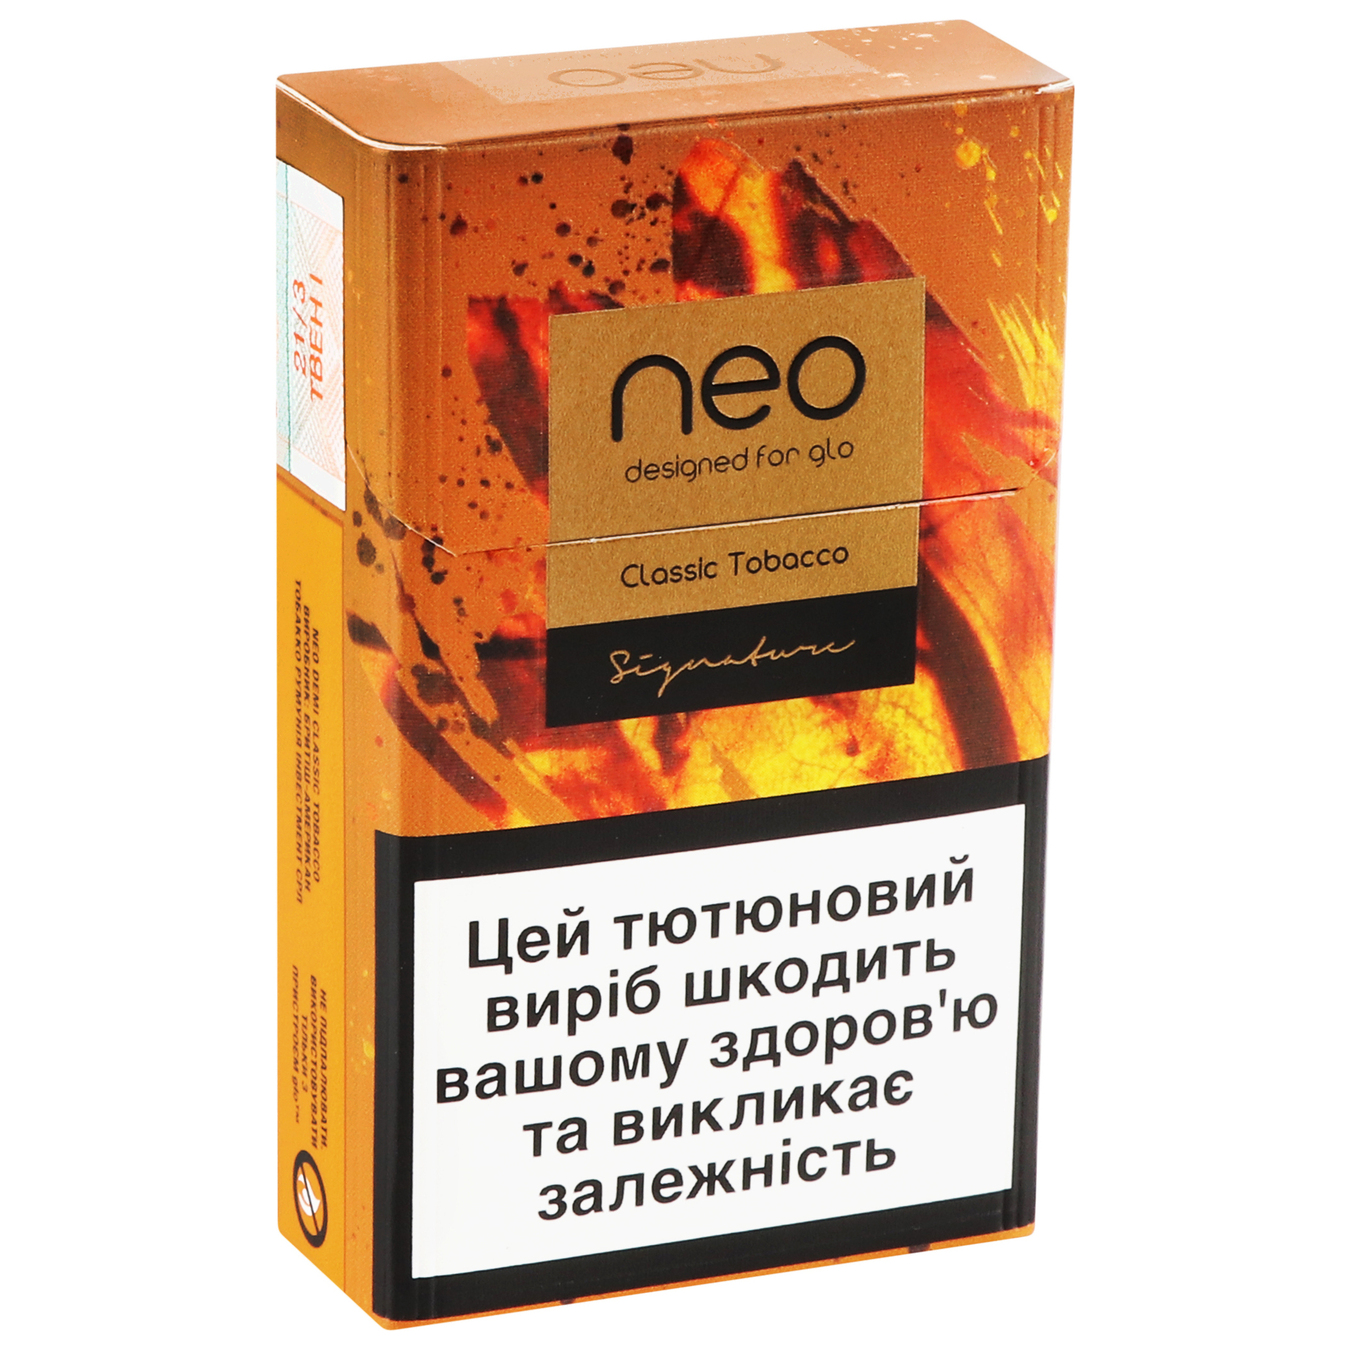 Sticks Neo Demi Classic Tobacco tobacco containing 20pcs (the price is indicated without excise tax) 3